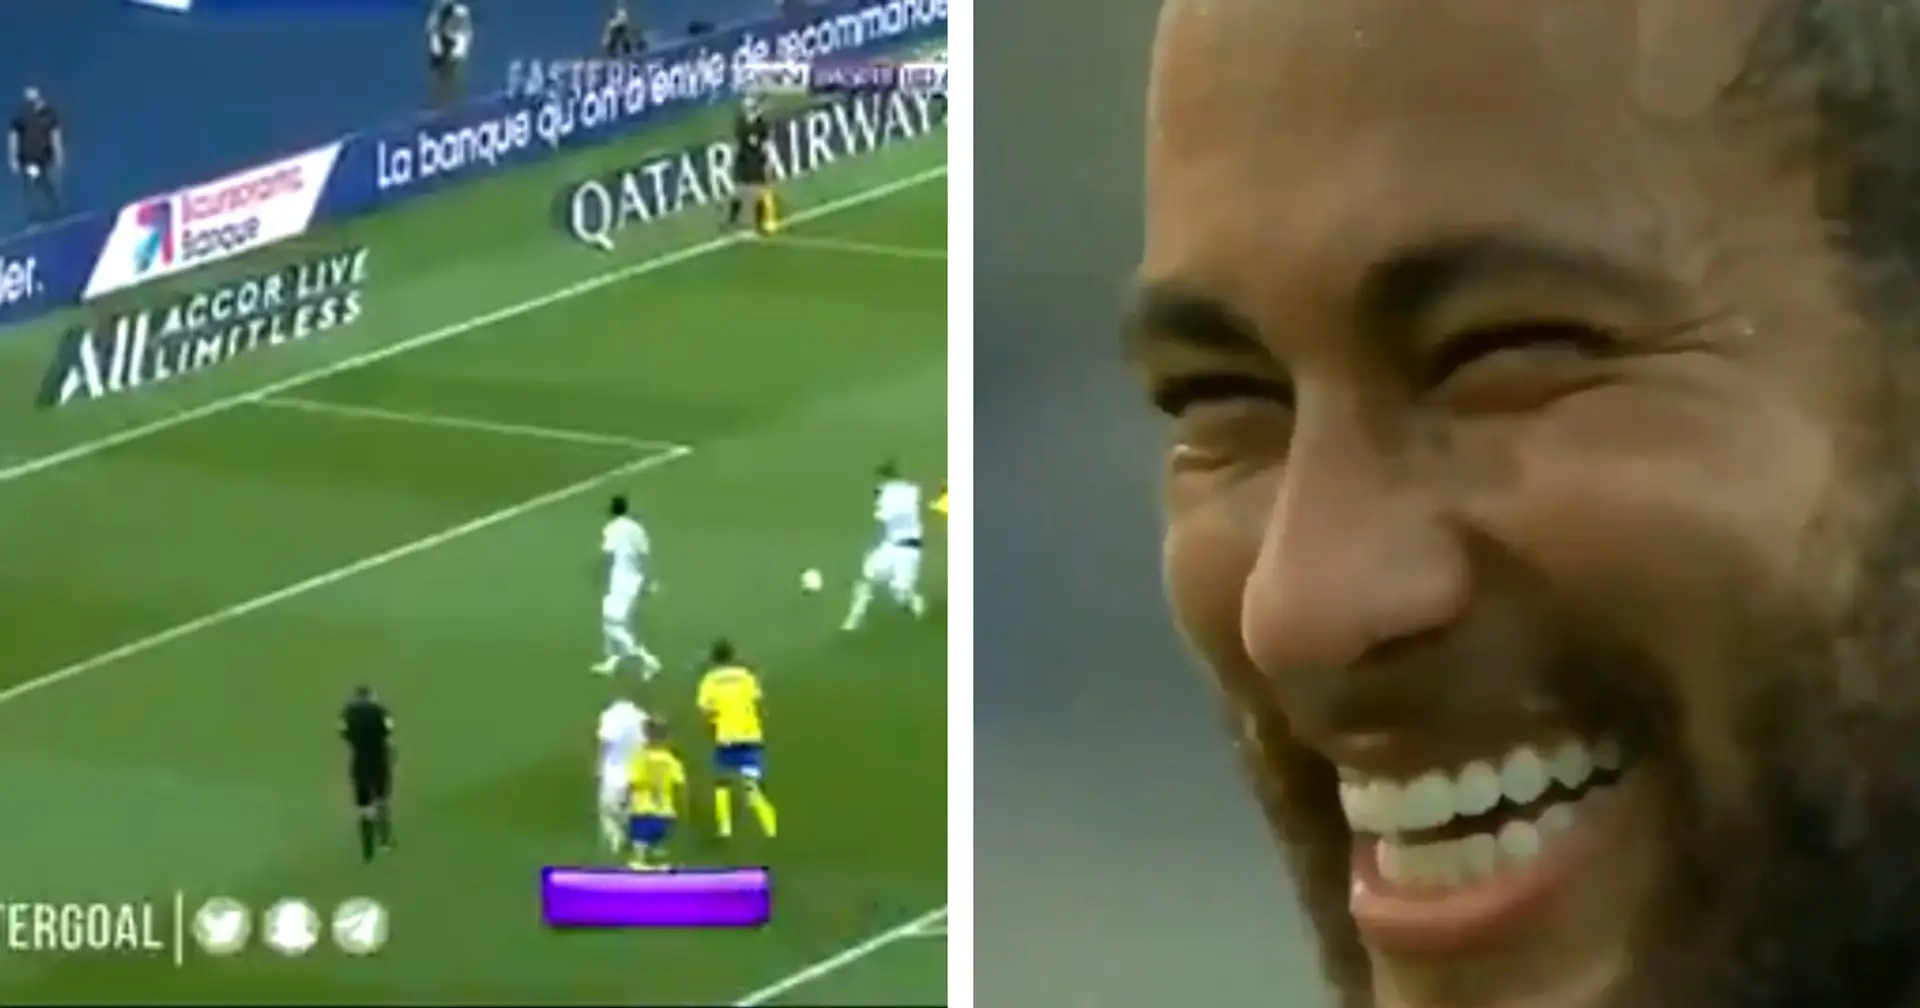 Neymar sets up Mauro Icardi with masterful pass-penalty seconds after asking keeper which corner to shoot in